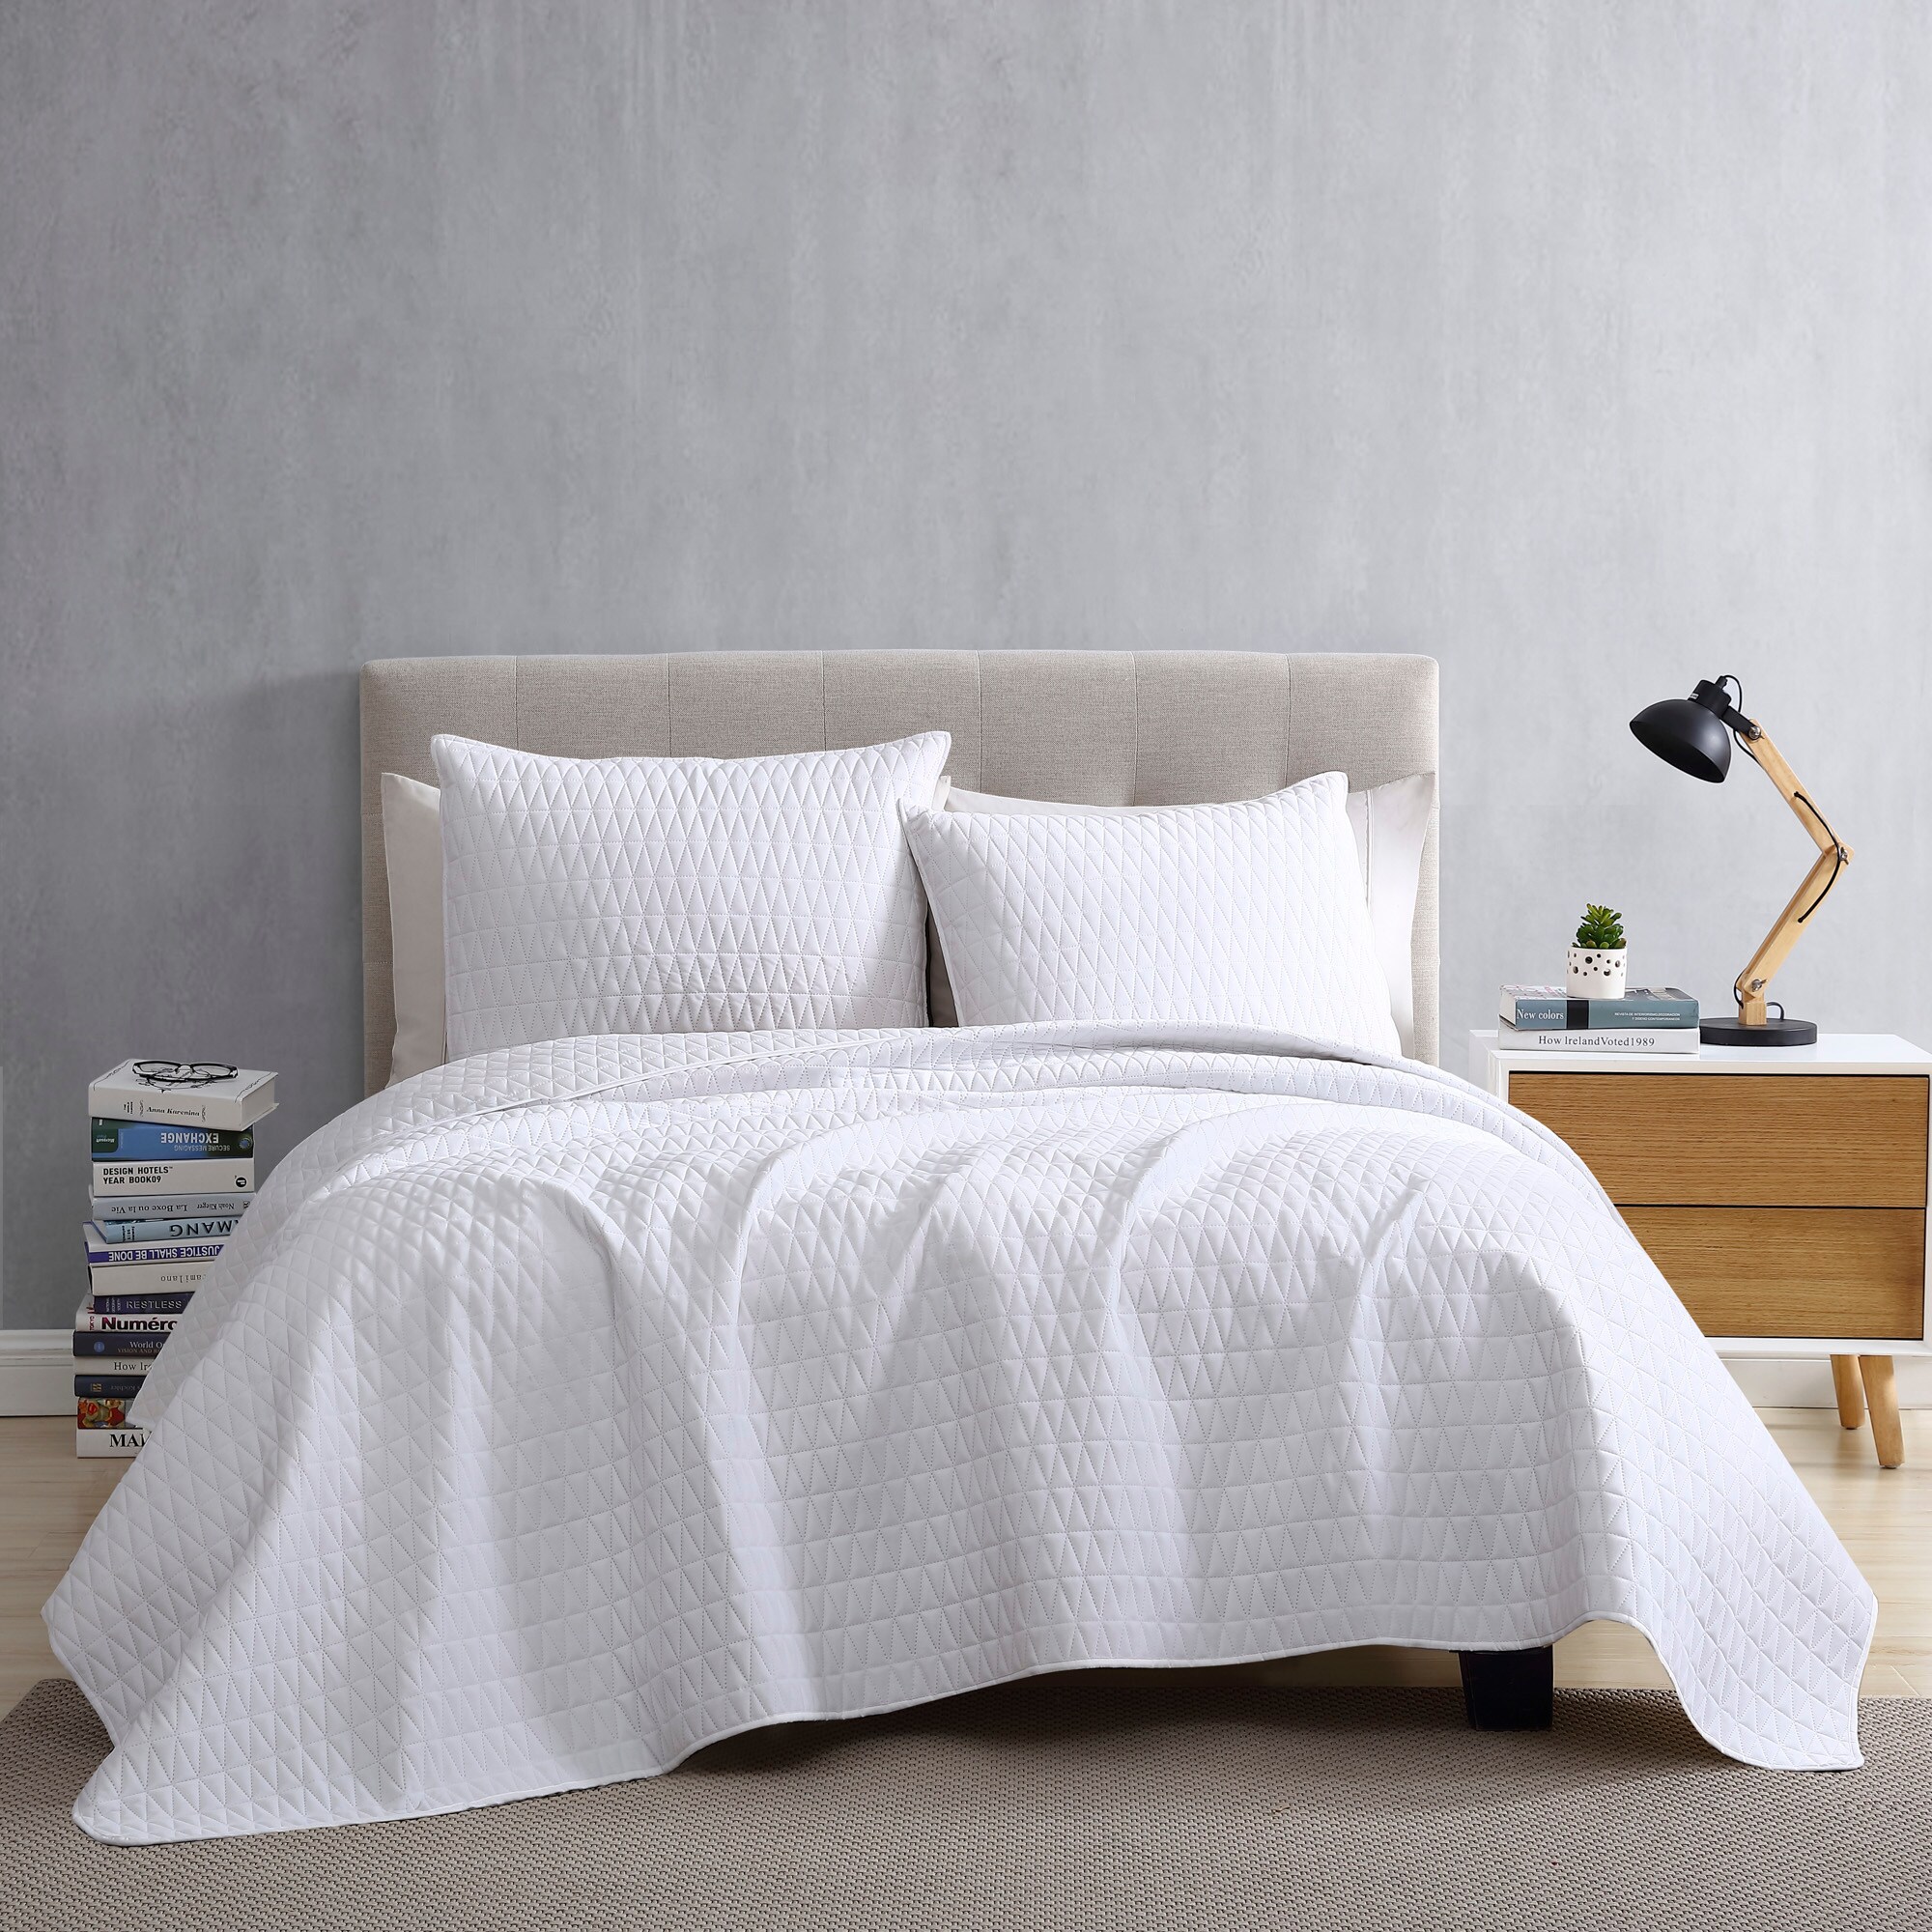 Brielle Home Gibson 3-Piece White King Quilt Set at Lowes.com